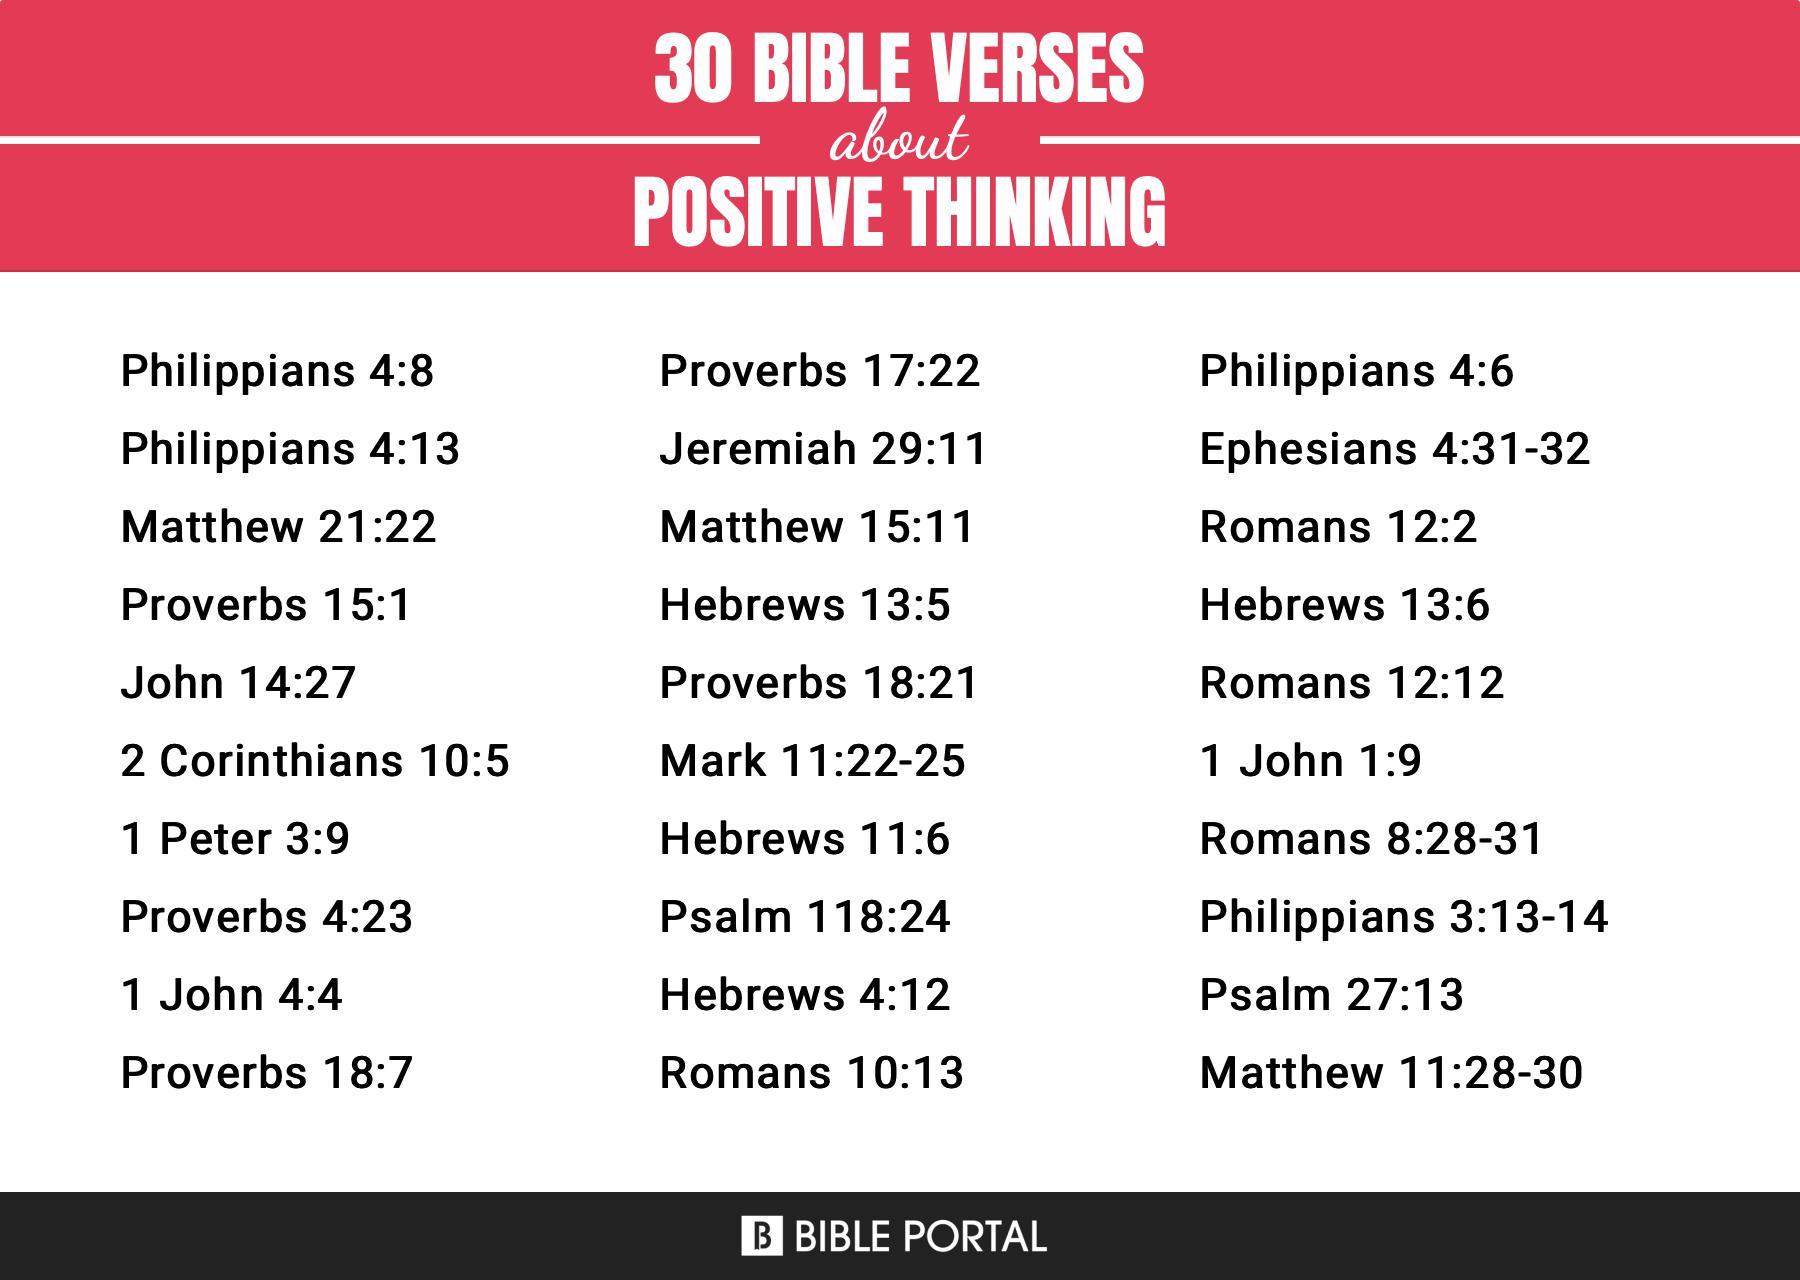 What Does the Bible Say about Positive Thinking?